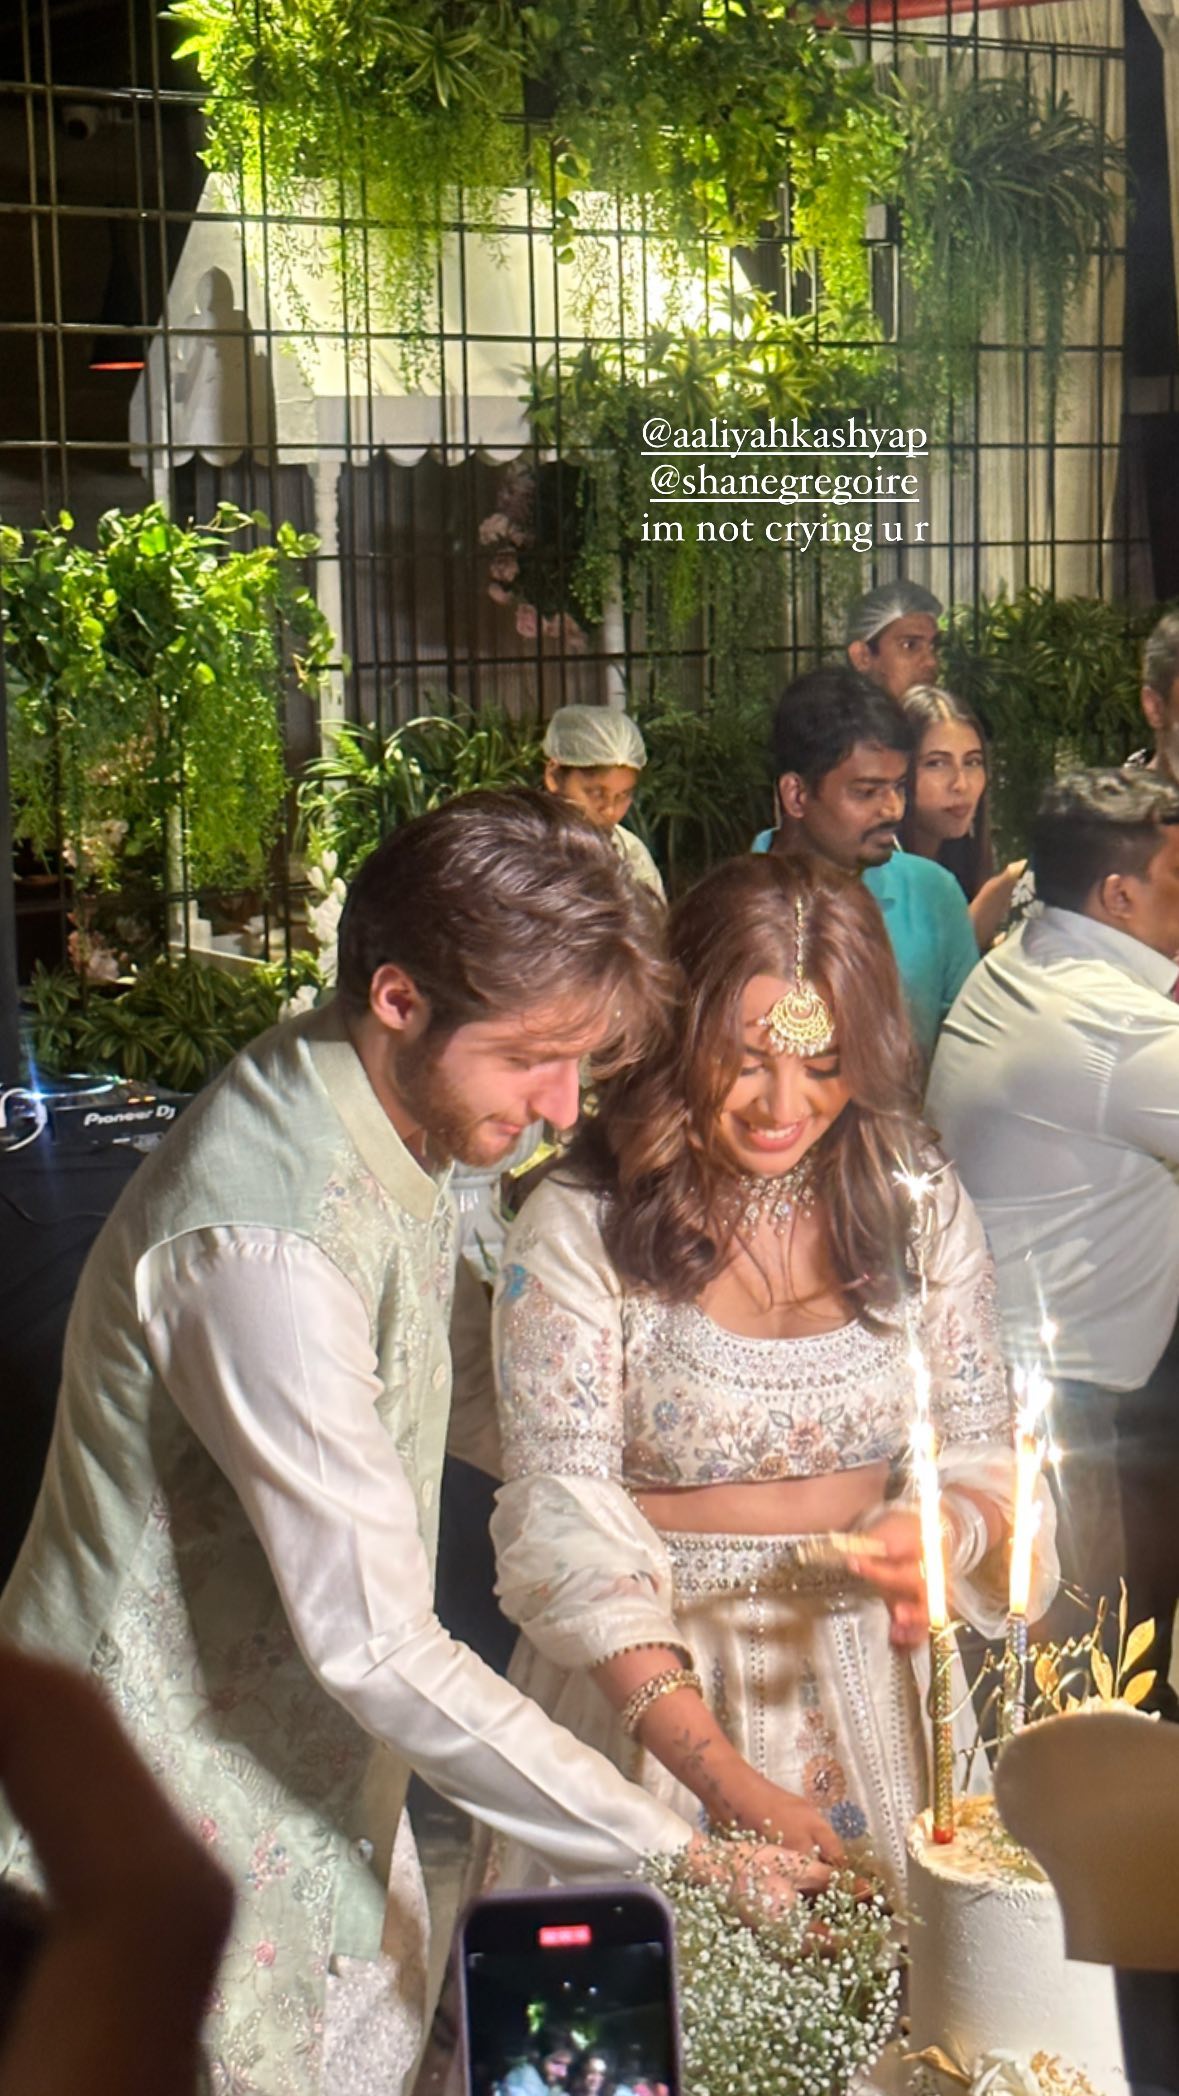 Aaliyah-Kashyap-and-Shane-Gregoire-cut-their-engagement-cake